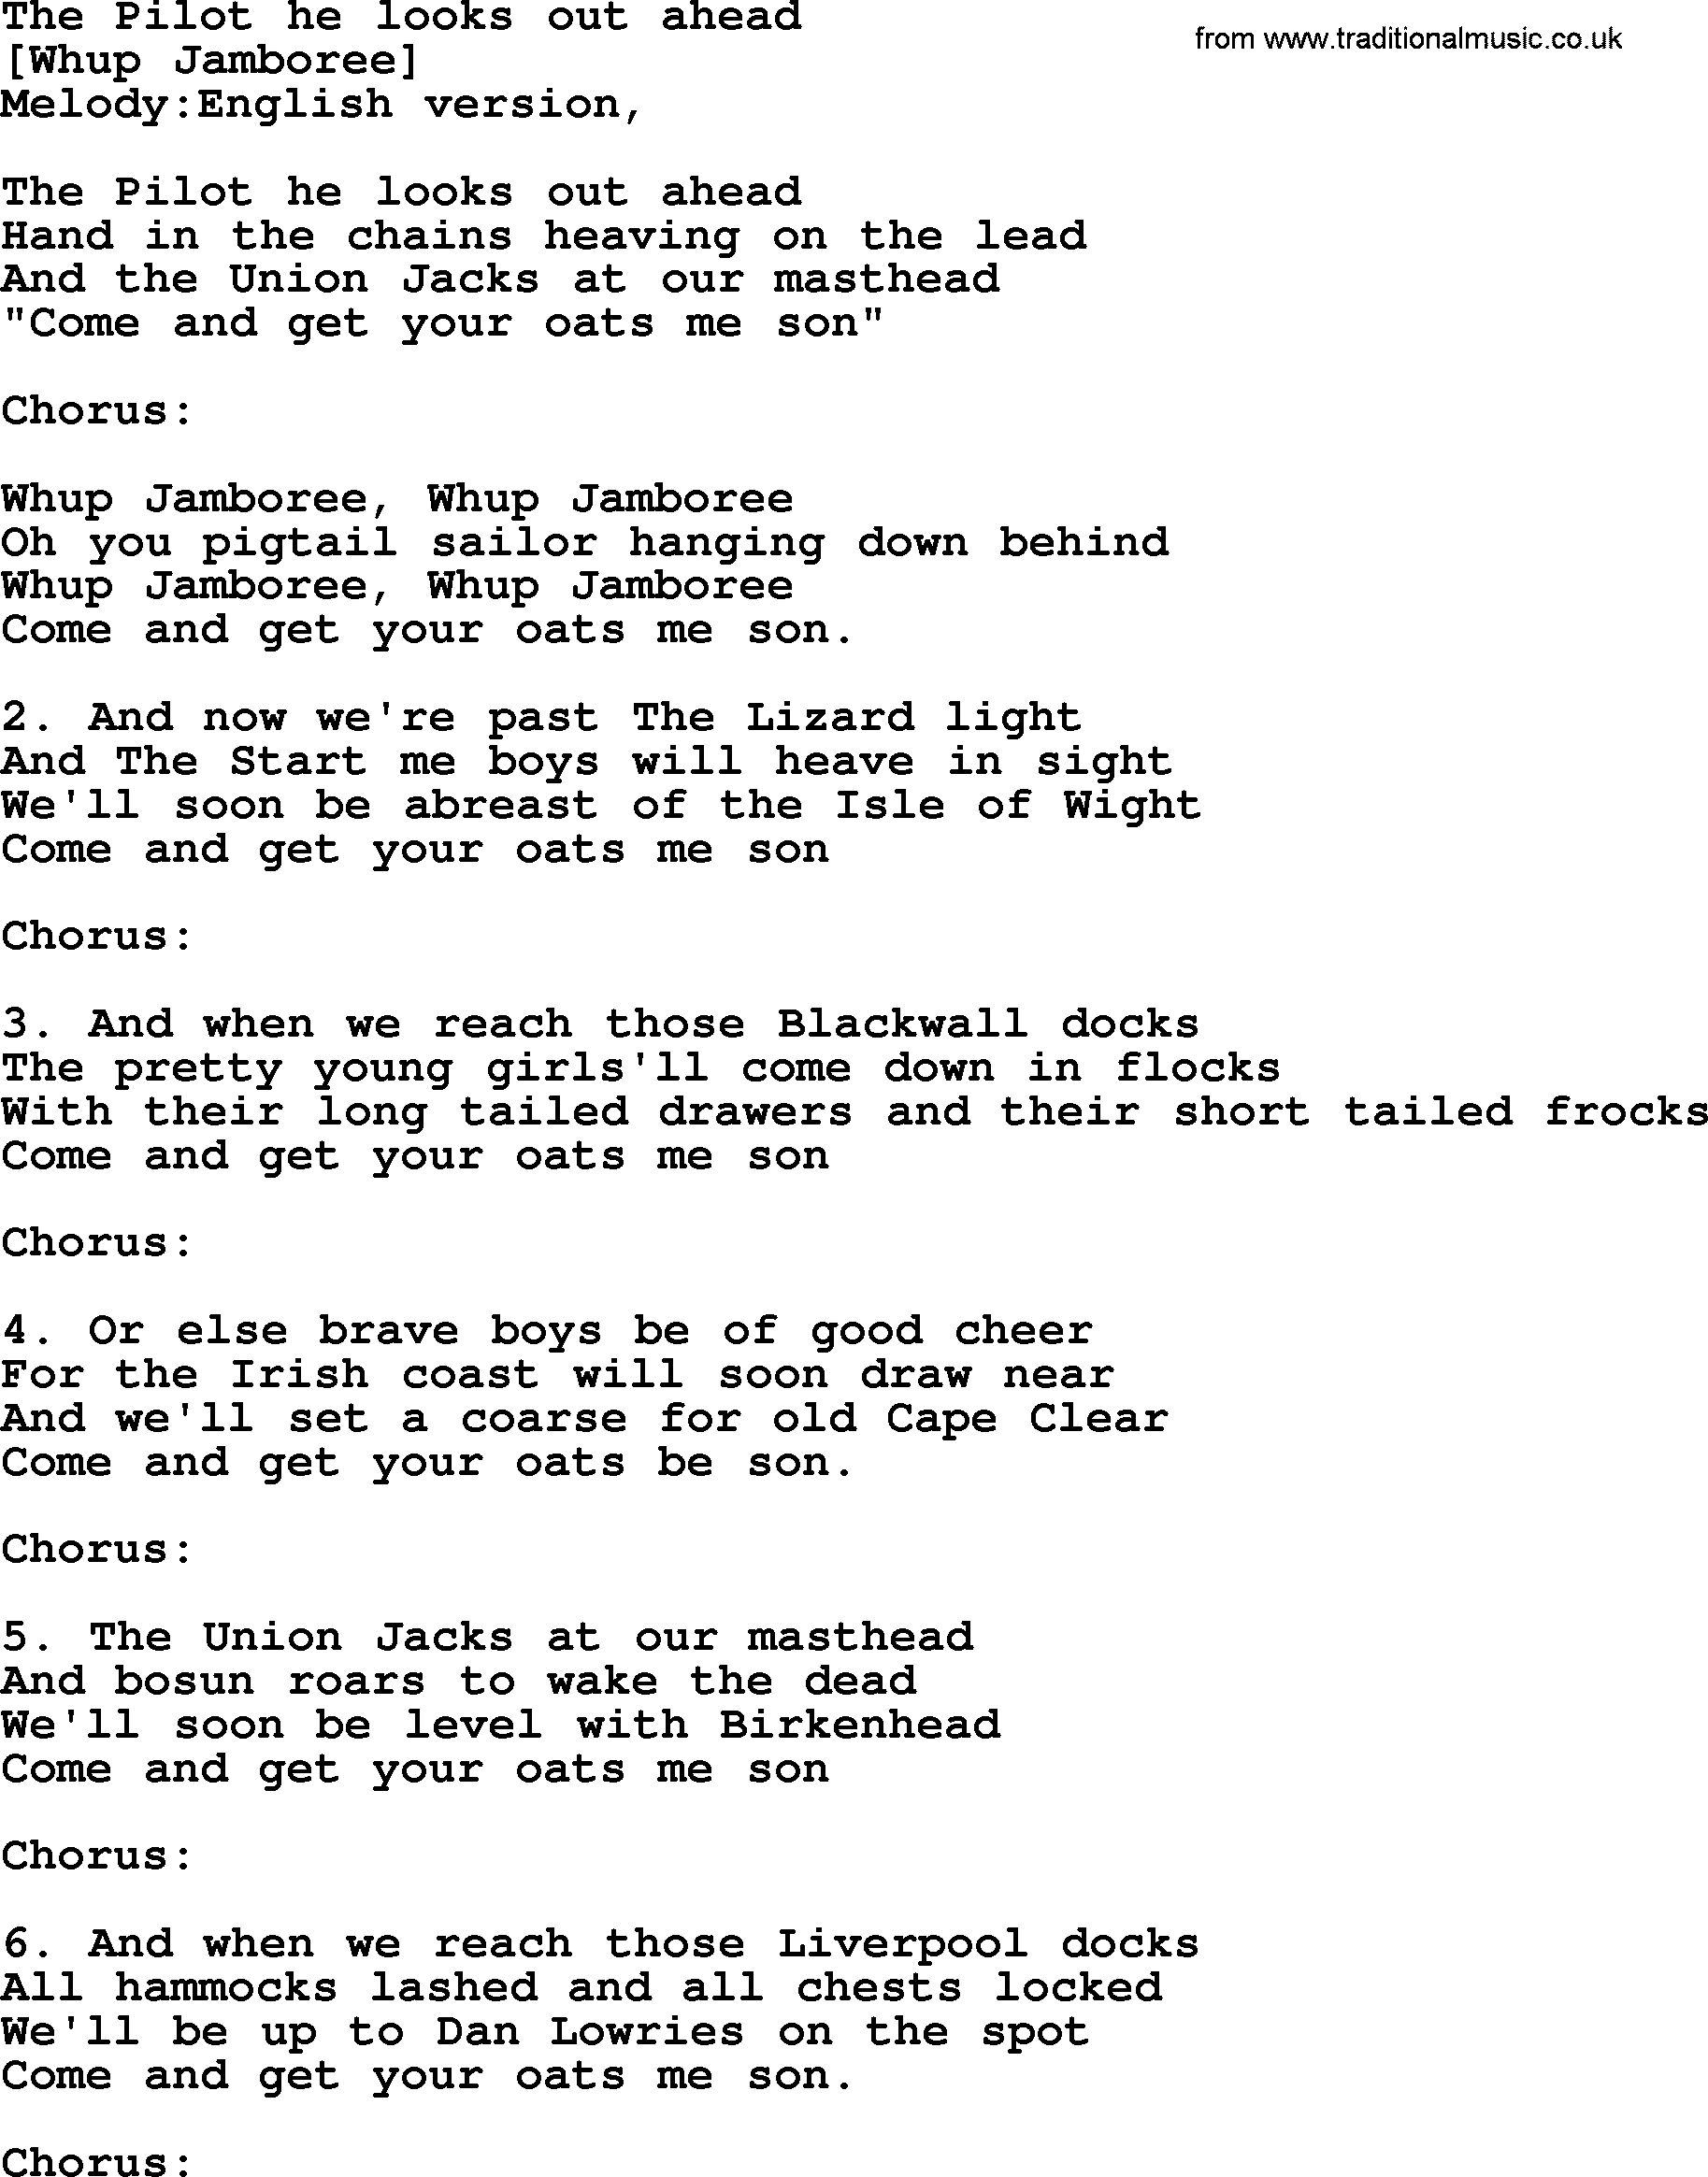 Old English Song: The Pilot He Looks Out Ahead lyrics